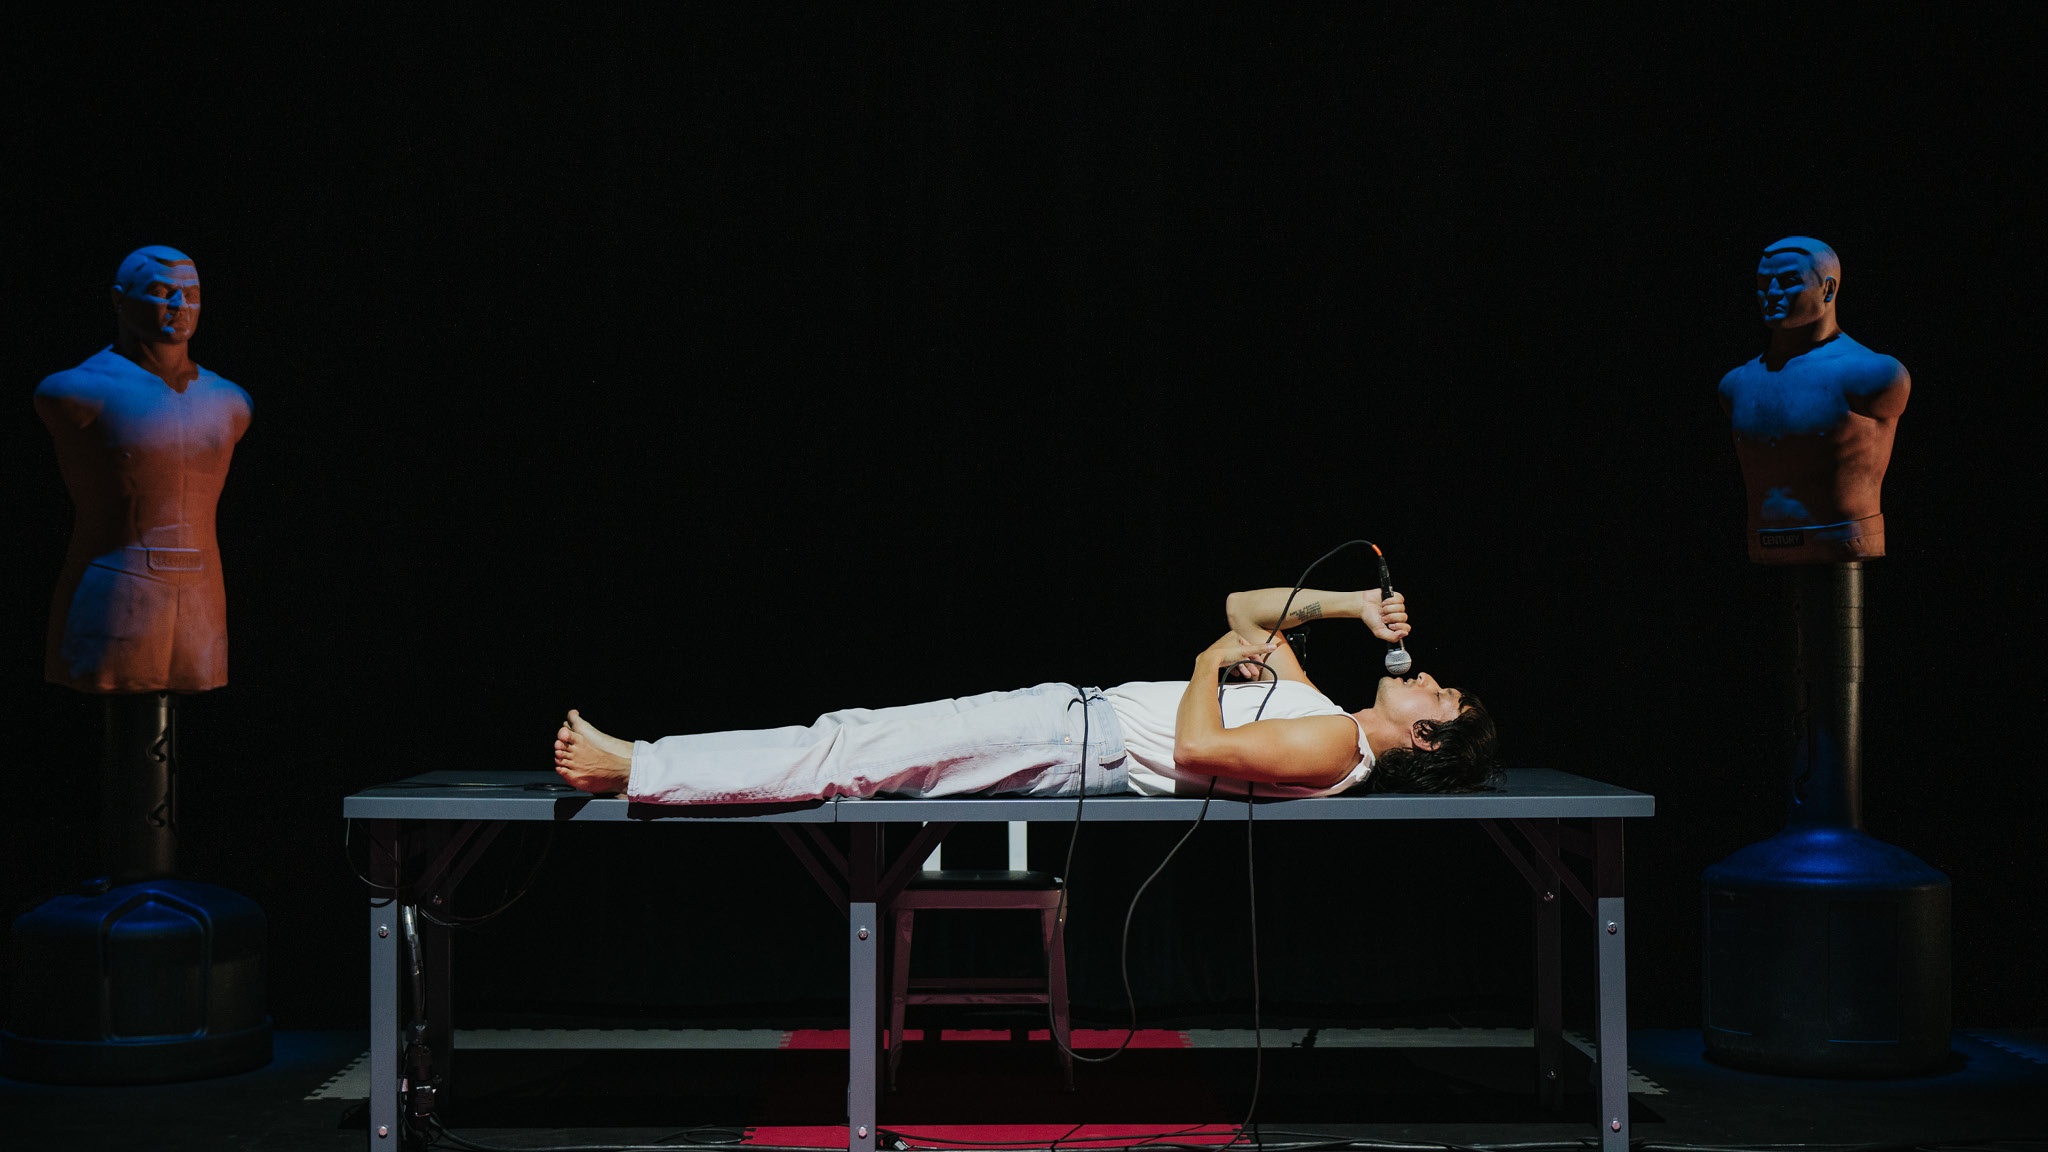 The artist Kyle Dacuyan lies on a folding table during a performance. The table is positioned on a dark stage between two sparring dummies. Kyle wears light-colored clothing and lies on his back holding a microphone up to his mouth. 